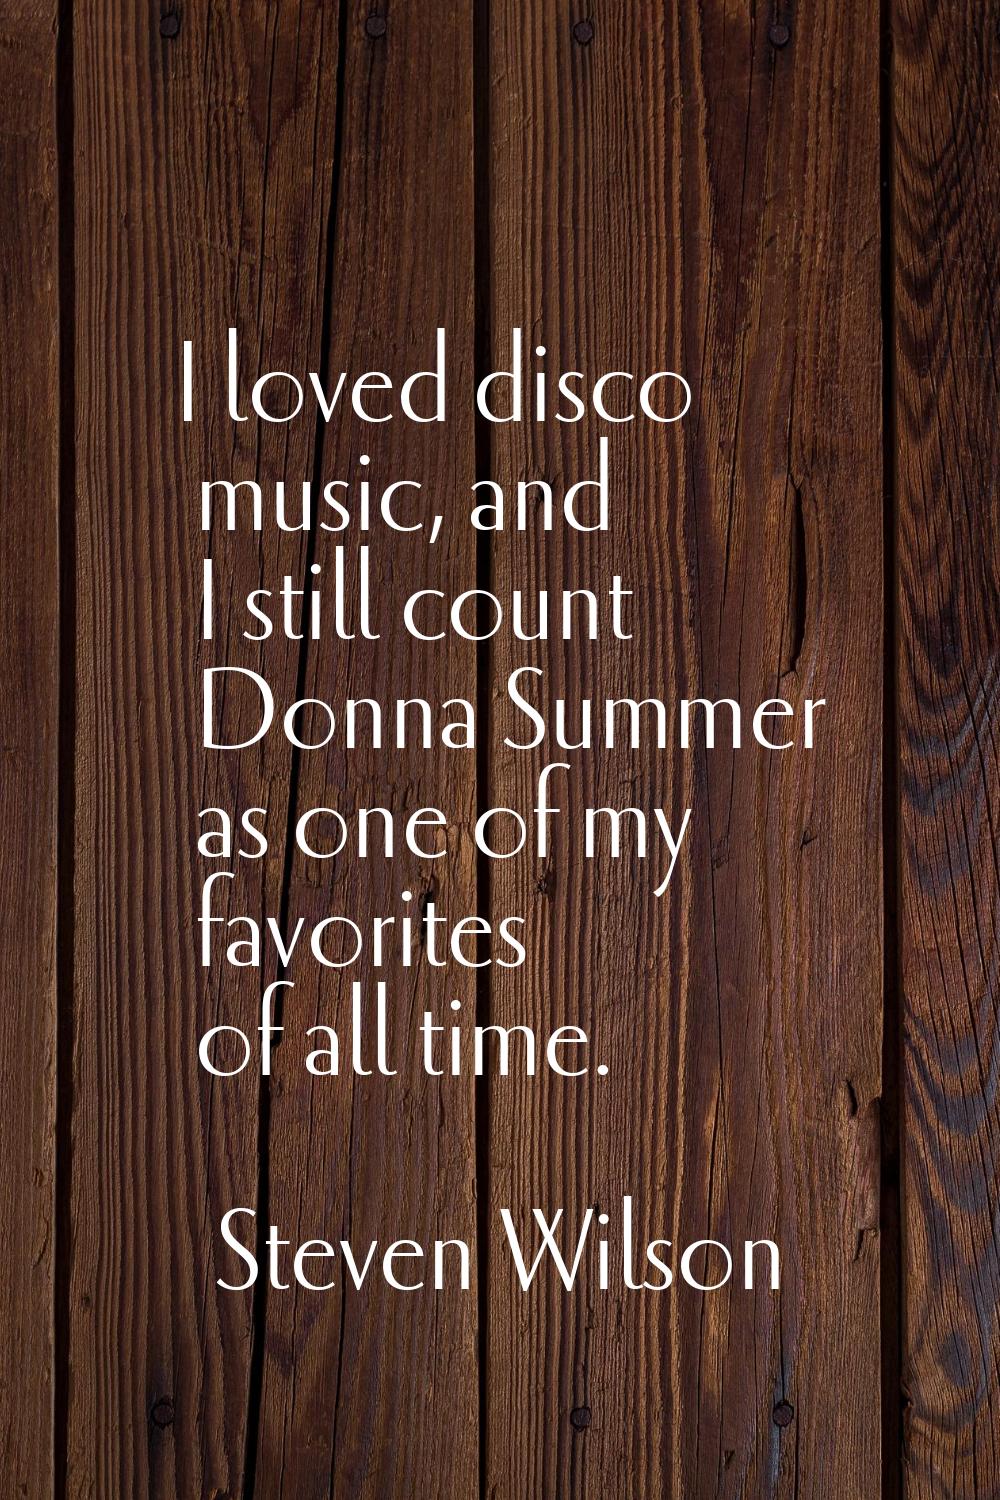 I loved disco music, and I still count Donna Summer as one of my favorites of all time.